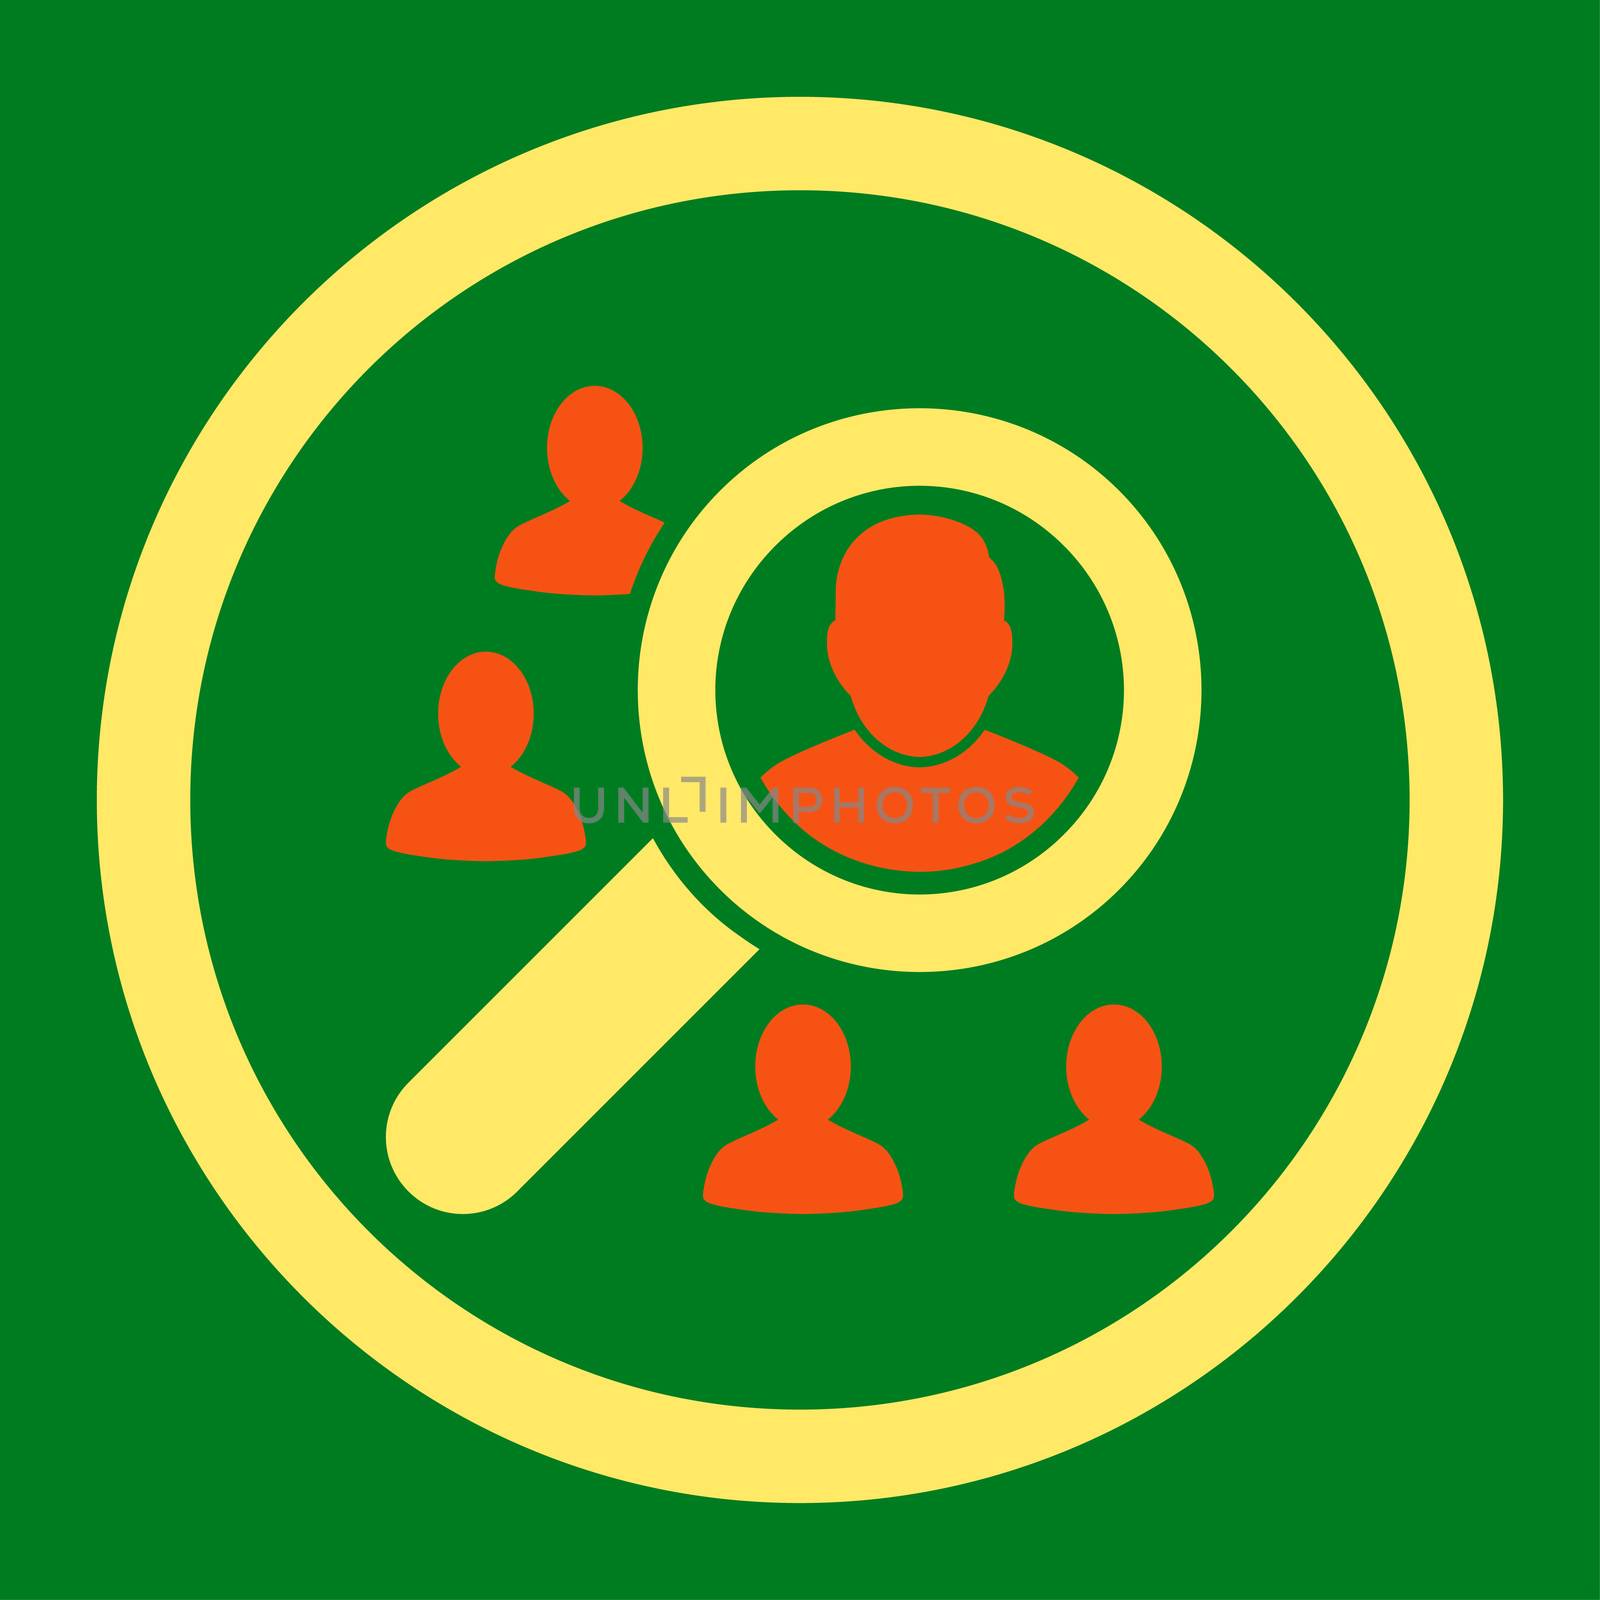 Marketing glyph icon. This rounded flat symbol is drawn with orange and yellow colors on a green background.